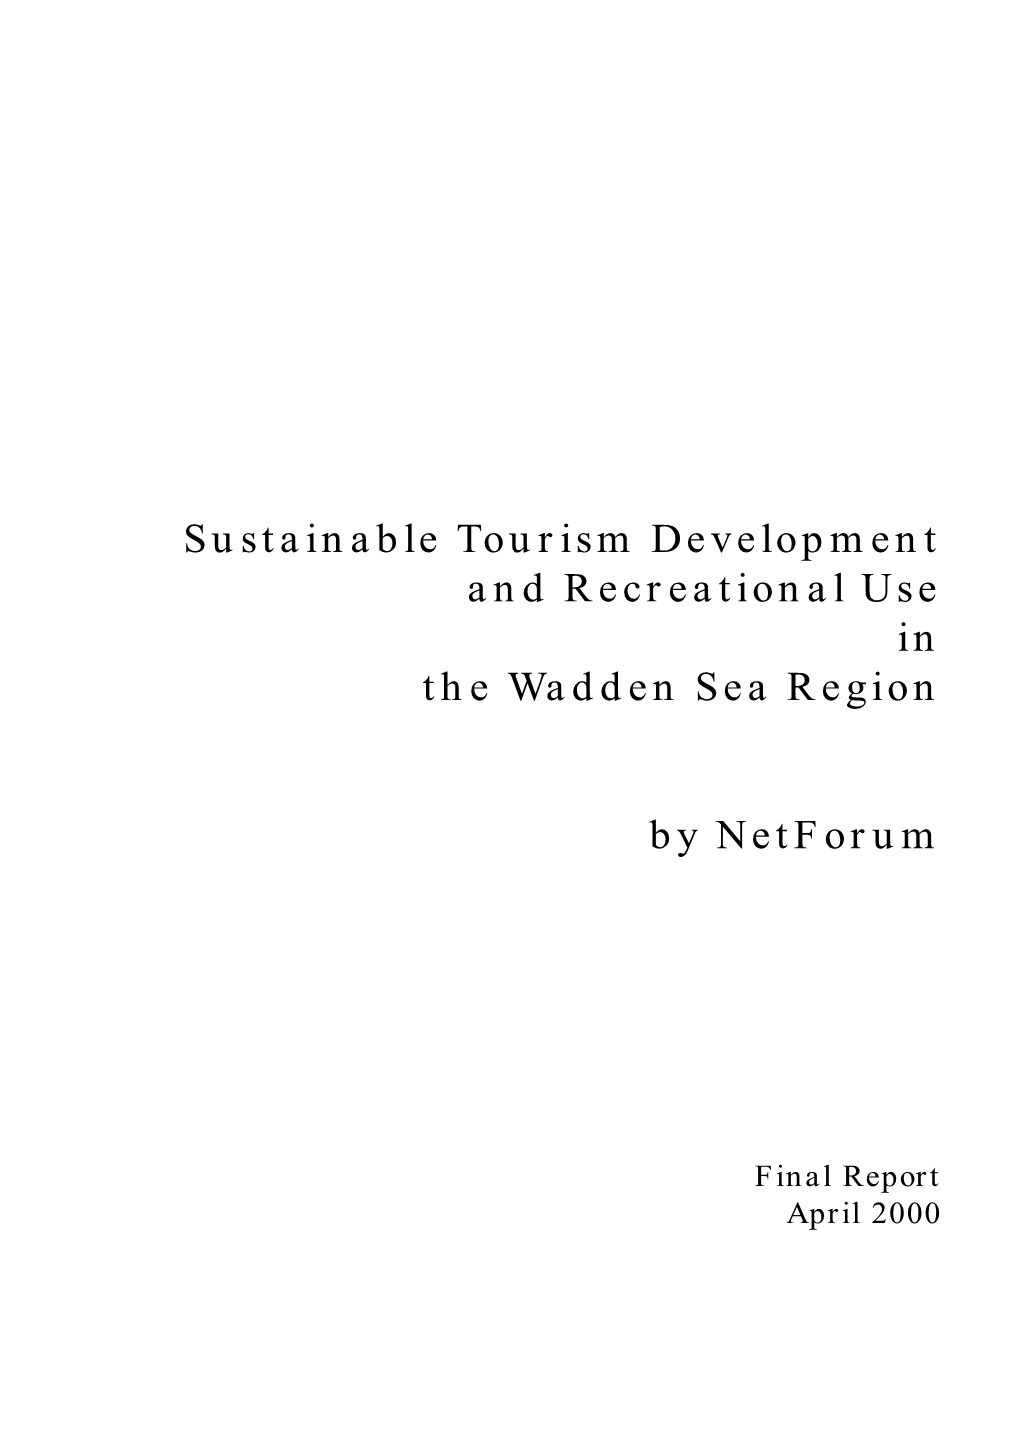 Sustainable Tourism Development and Recreational Use in the Wadden Sea Region